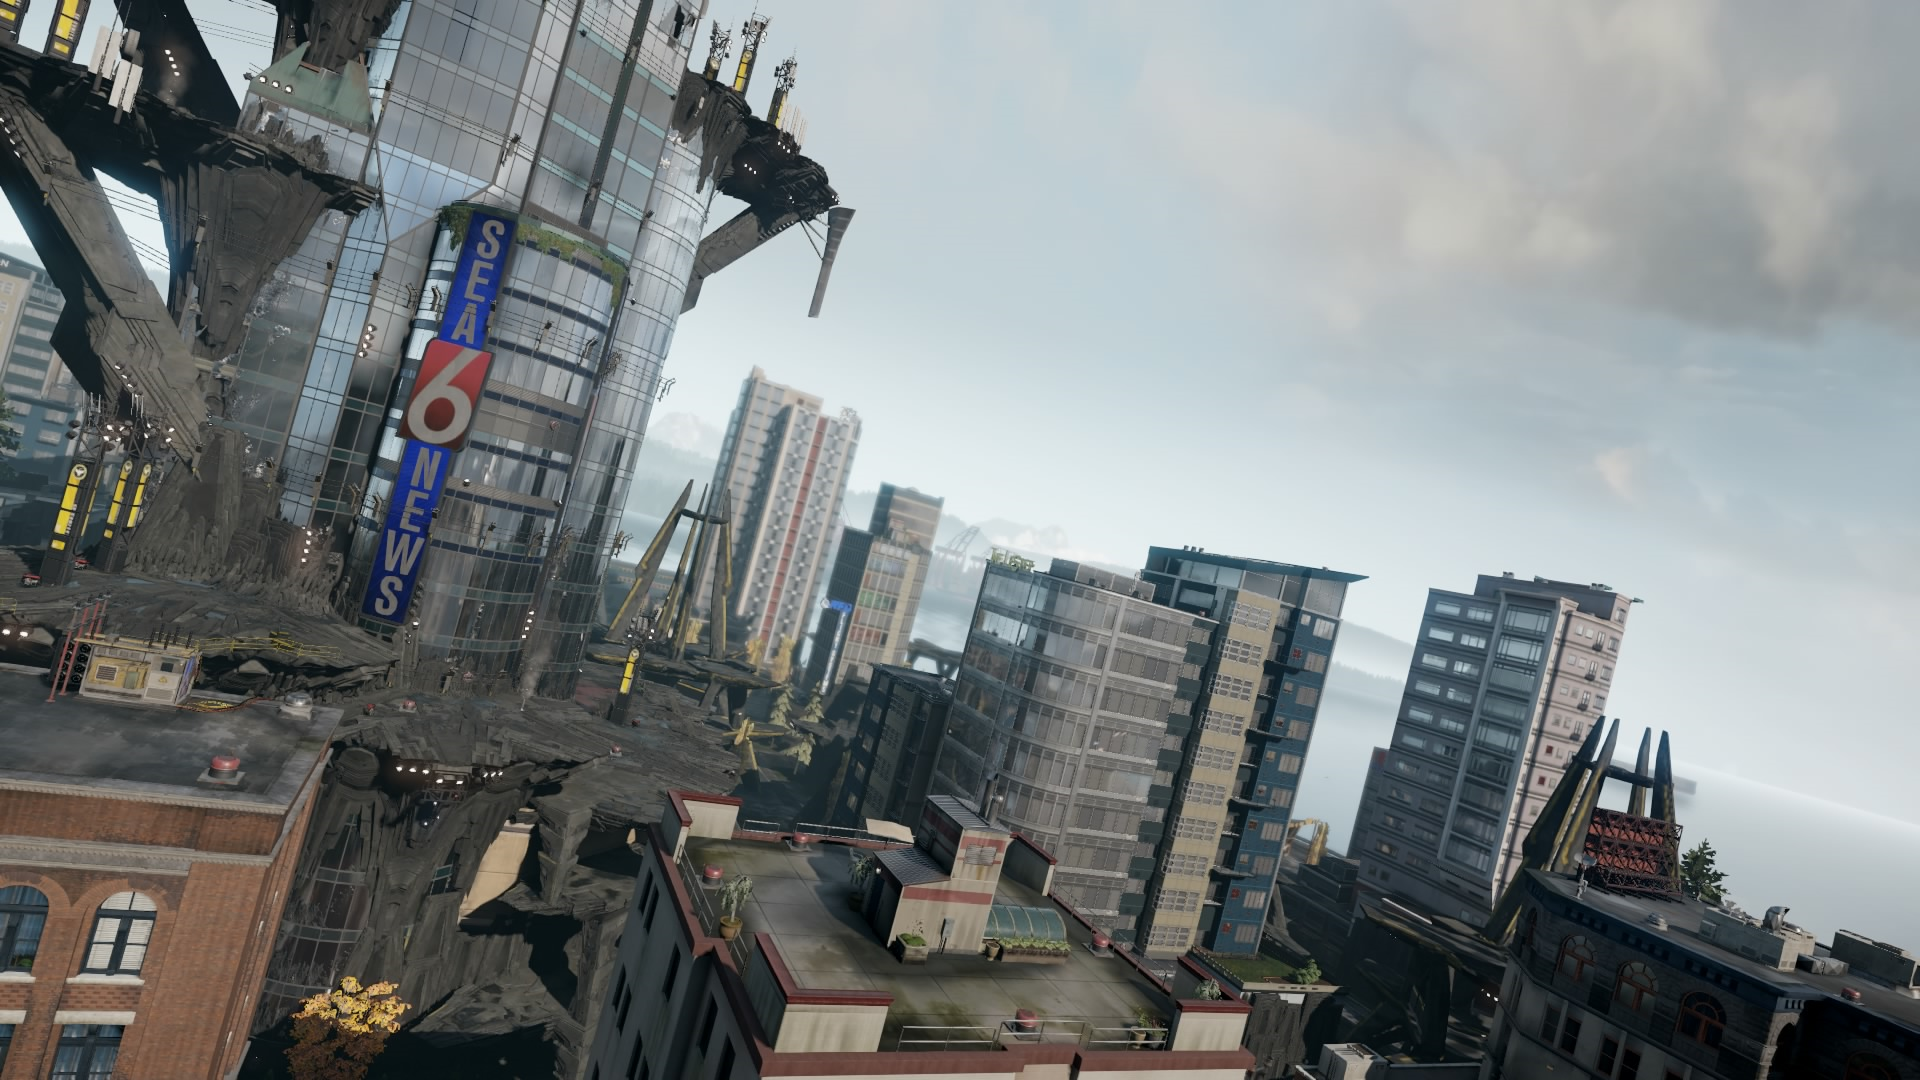 infamous second son map